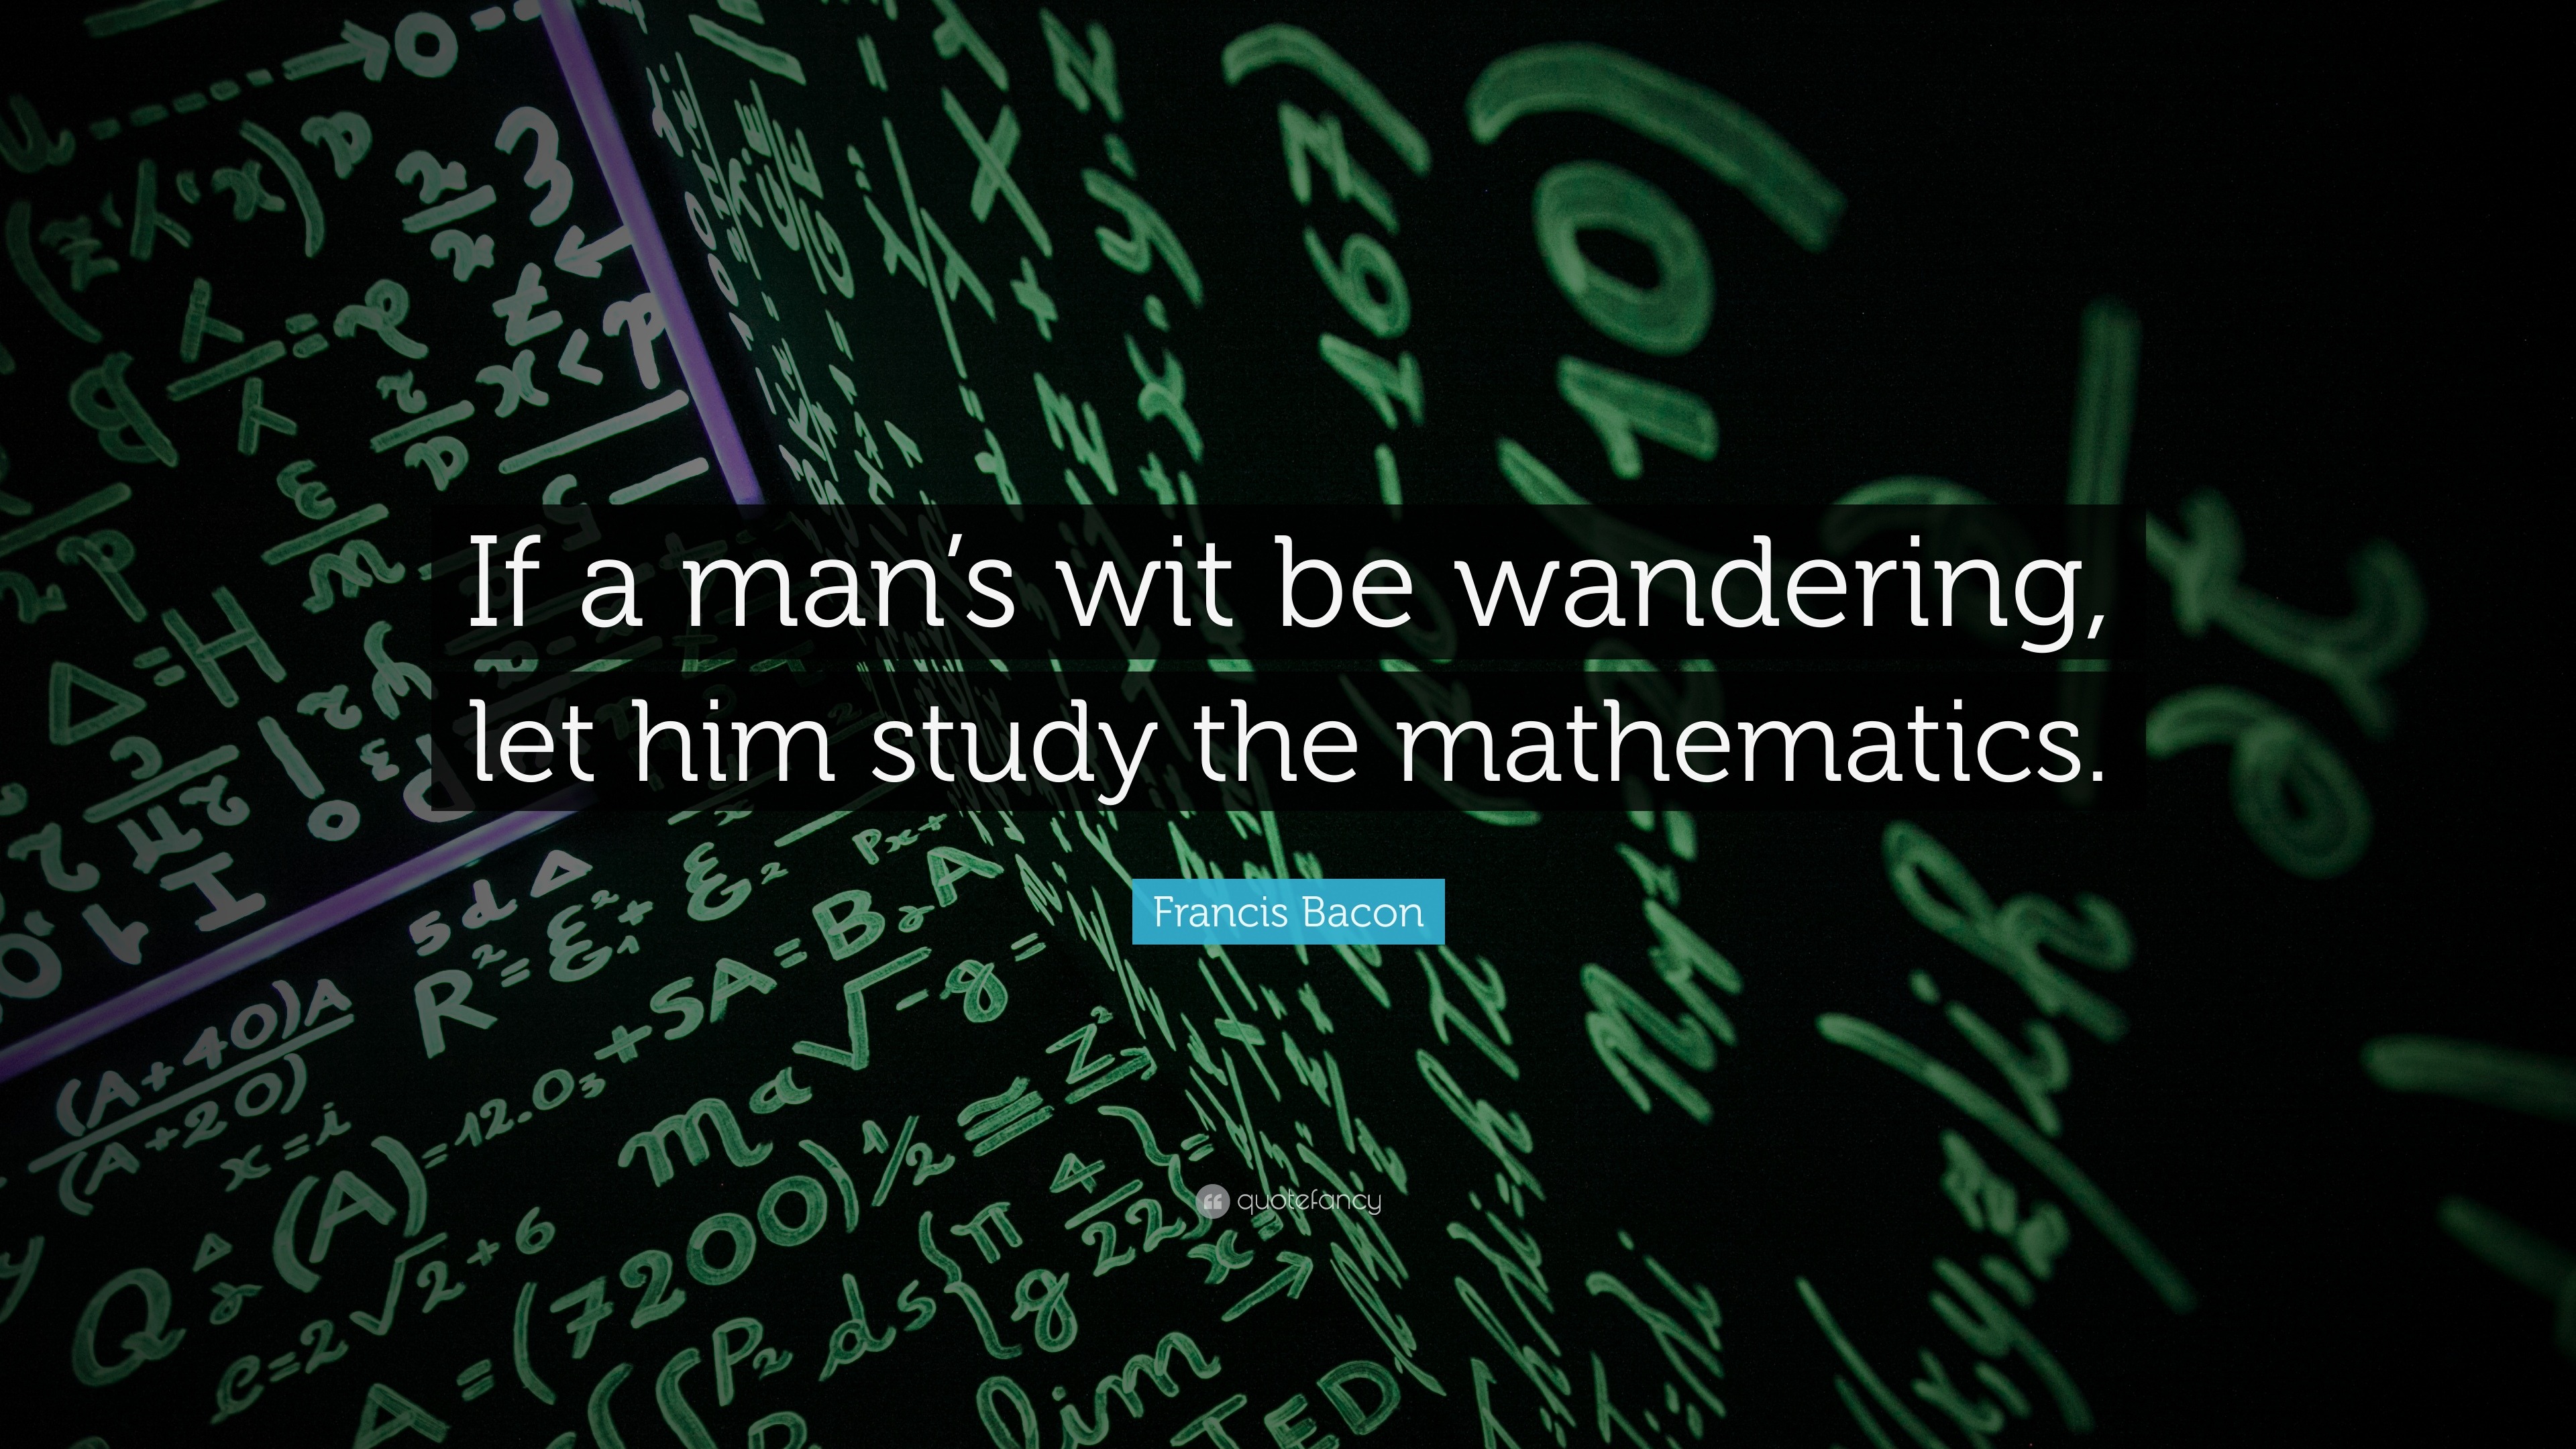 Math Quotes (40 wallpapers) - Quotefancy